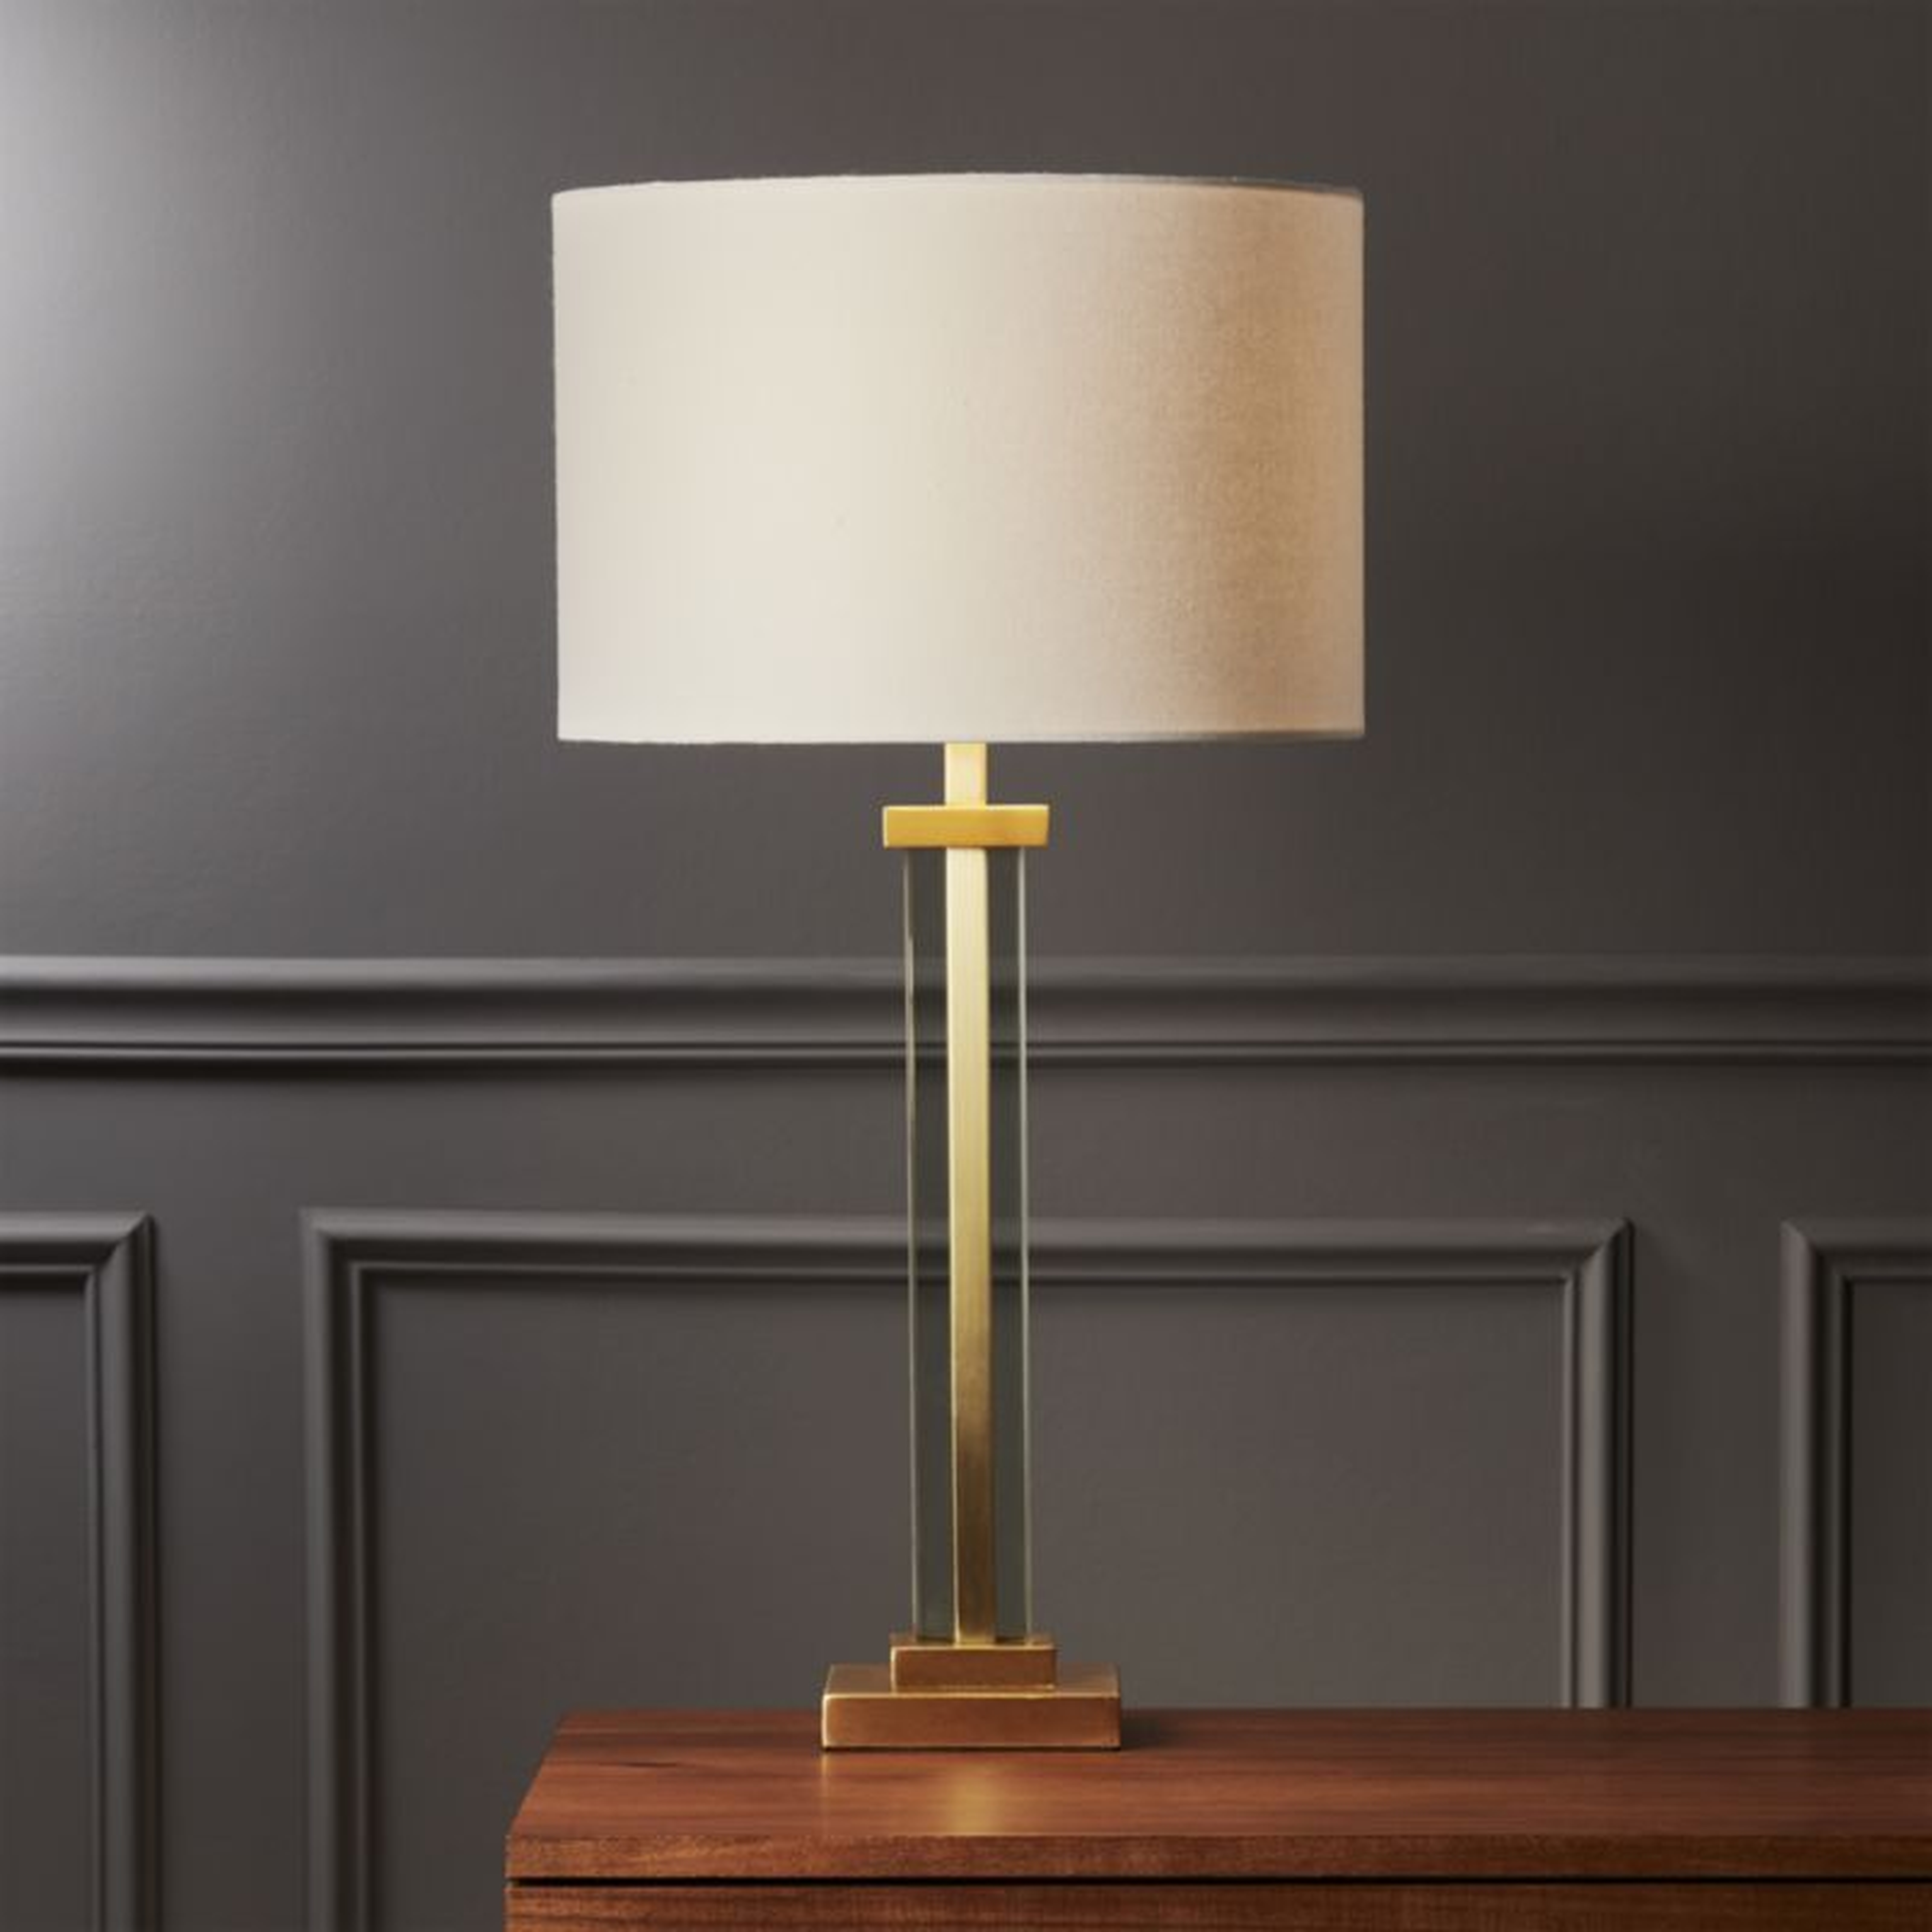 Panes Glass and Brass Table Lamp - CB2